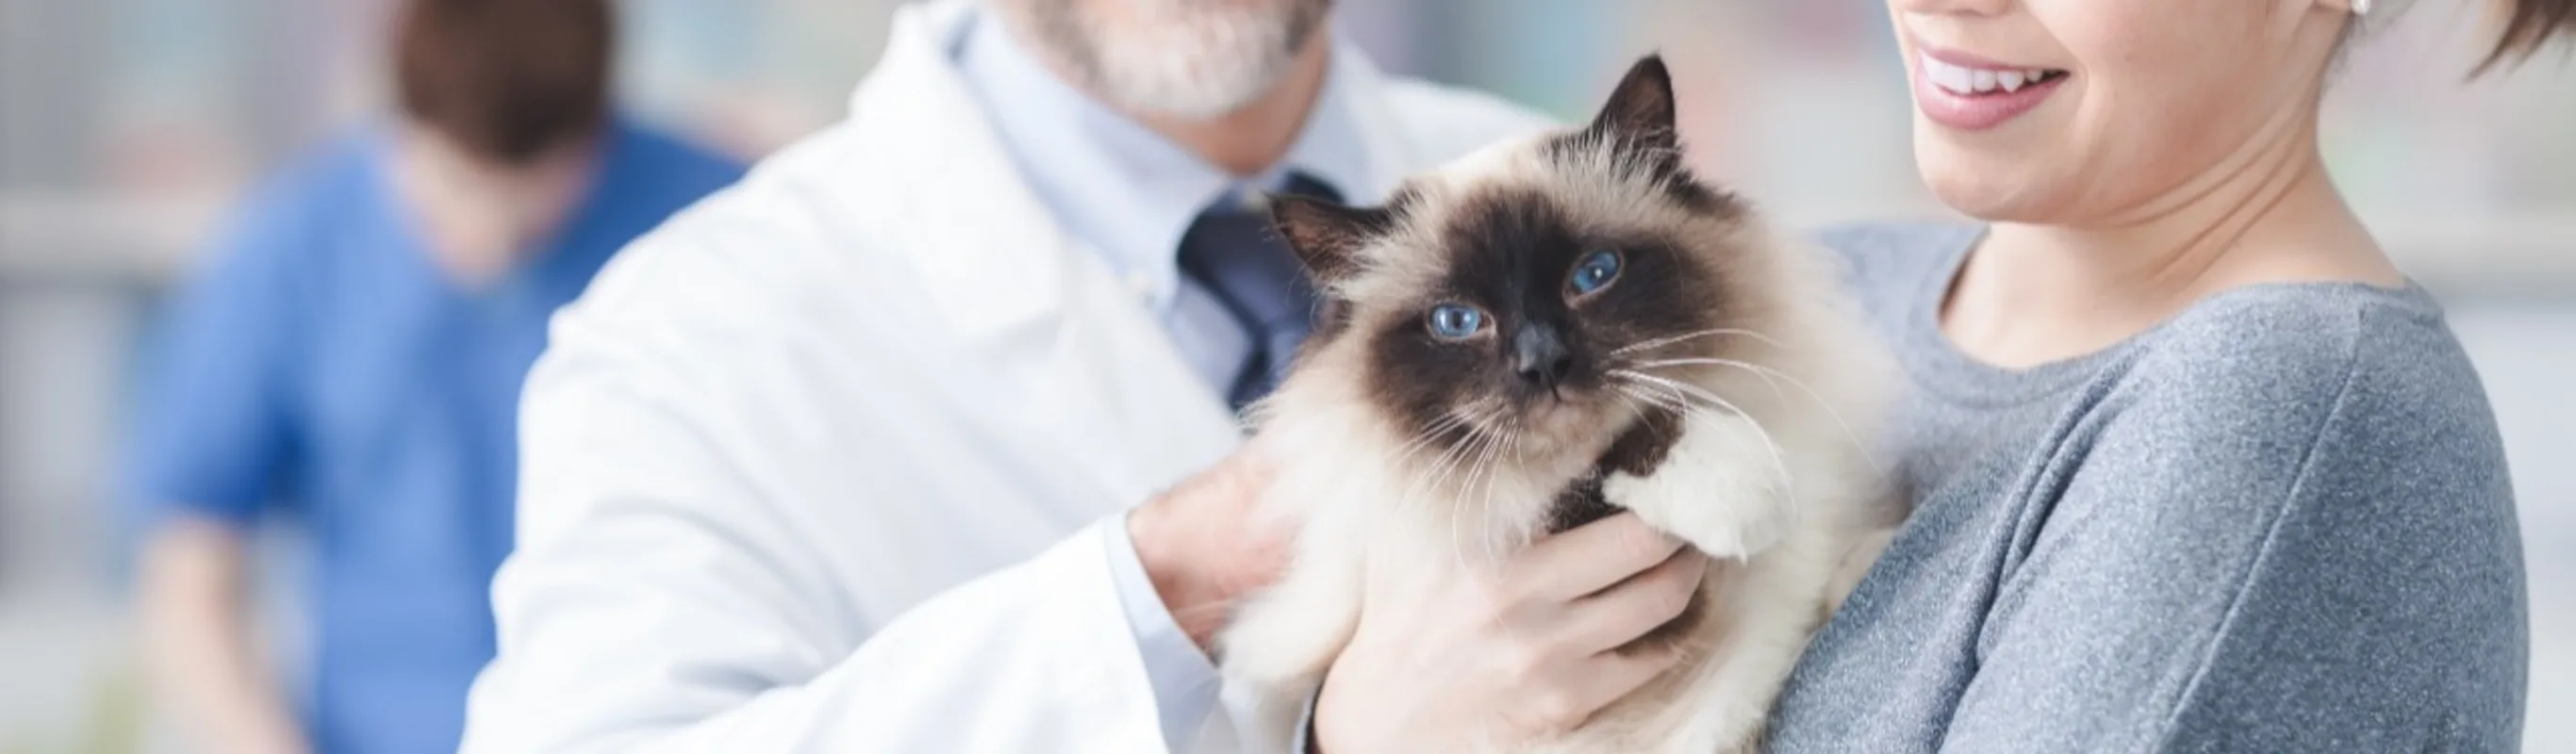 Cat about to be examined in clinic by veterinarians